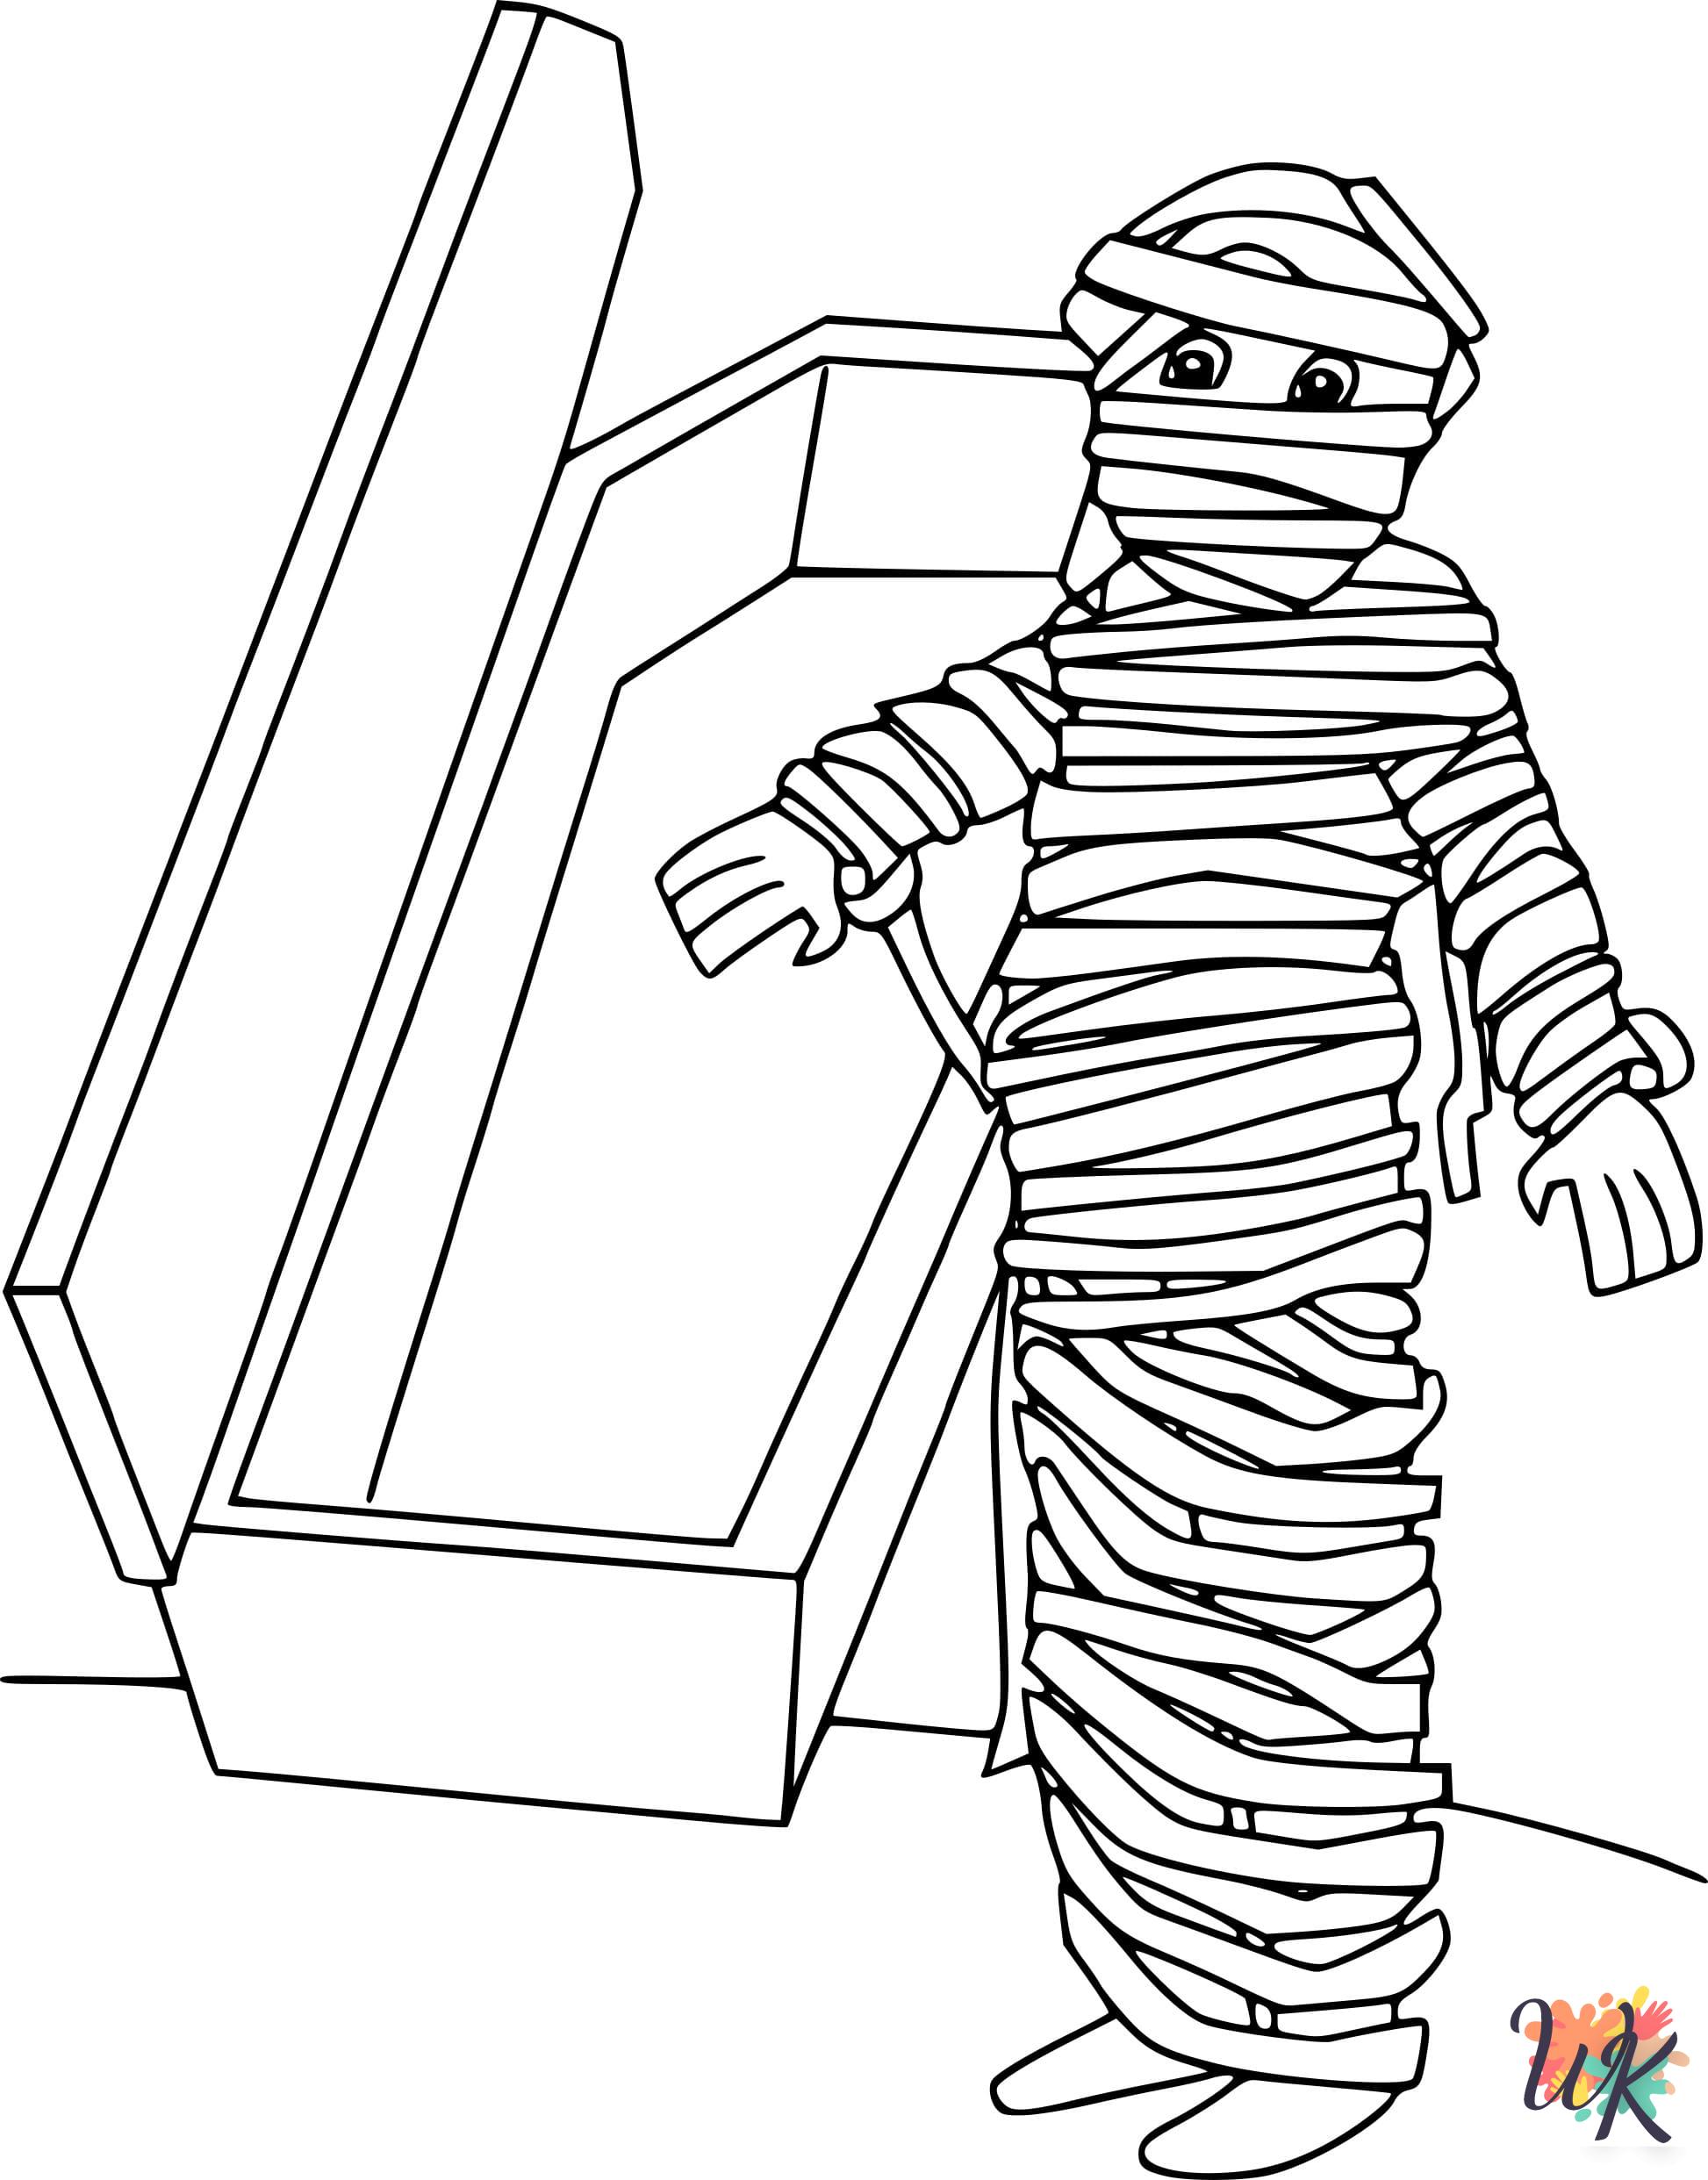 Mummy free coloring pages